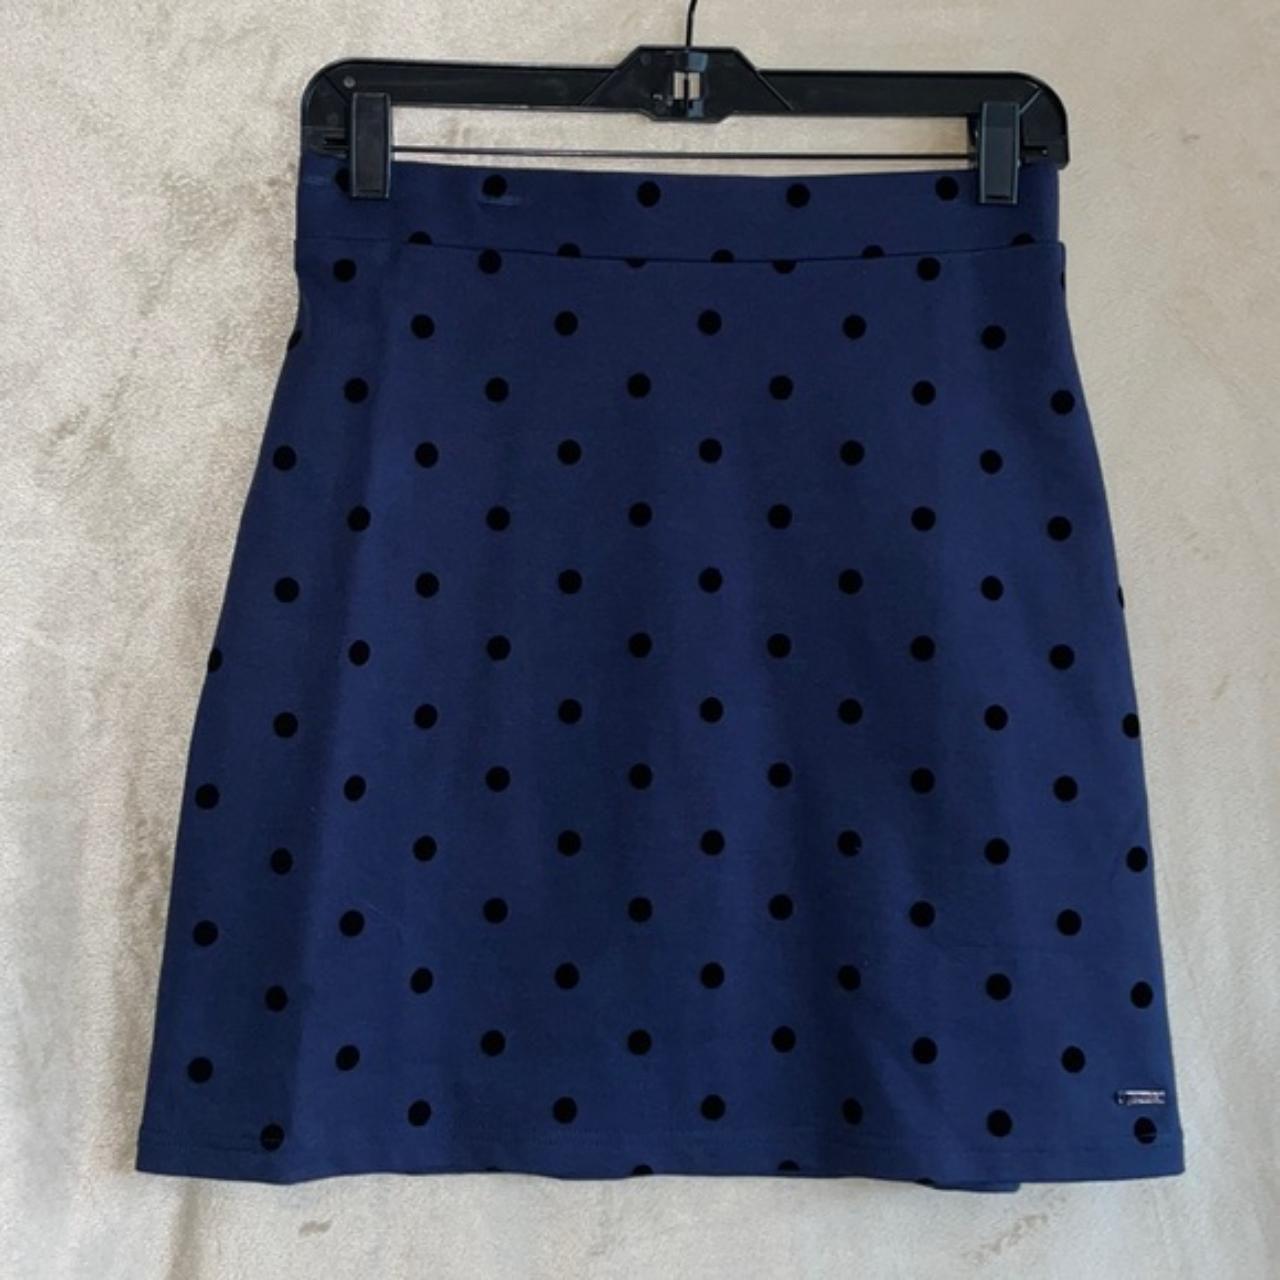 Joules Women's Black and Blue Skirt (5)